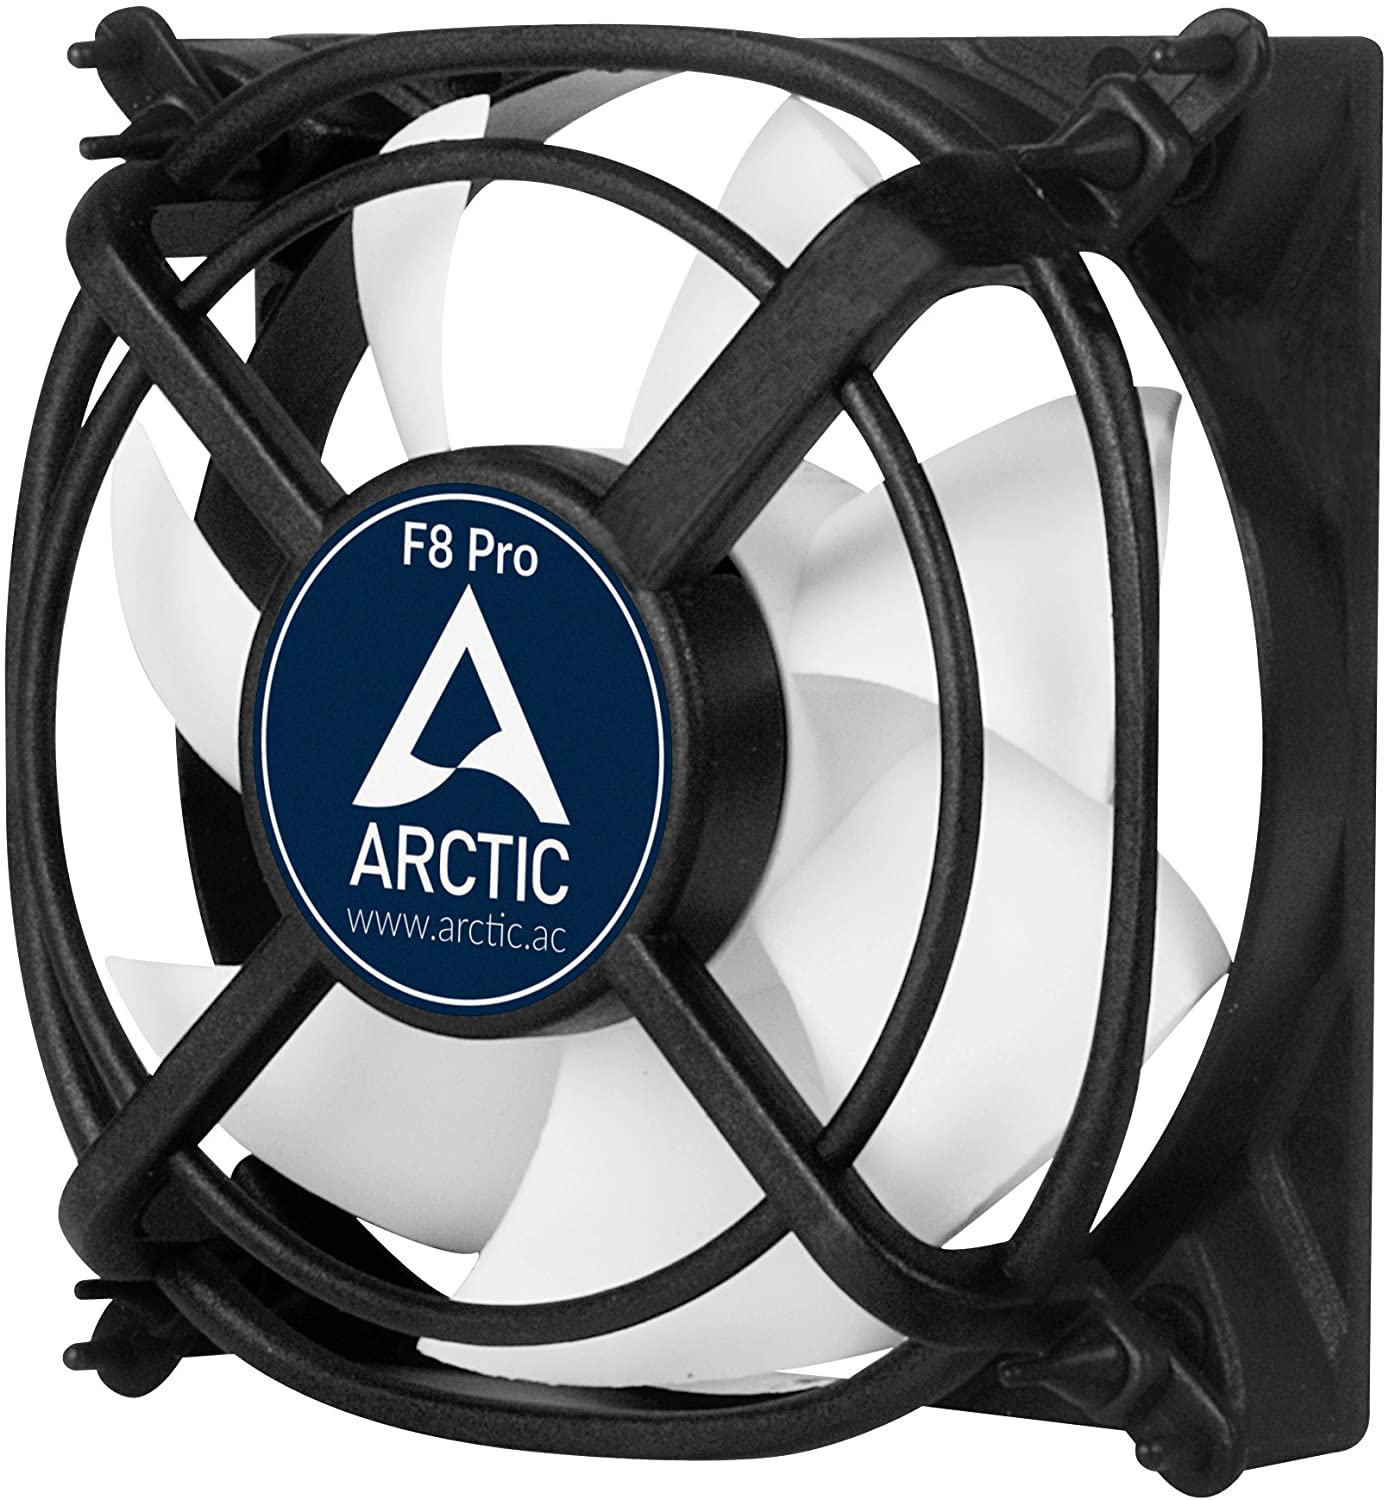 ARCTIC P8 PWM - 80 Mm Case Fan with PWM, Pressure-Optimised, Very Quiet Motor, Computer, Fan Speed: 200-3000 RPM - Black